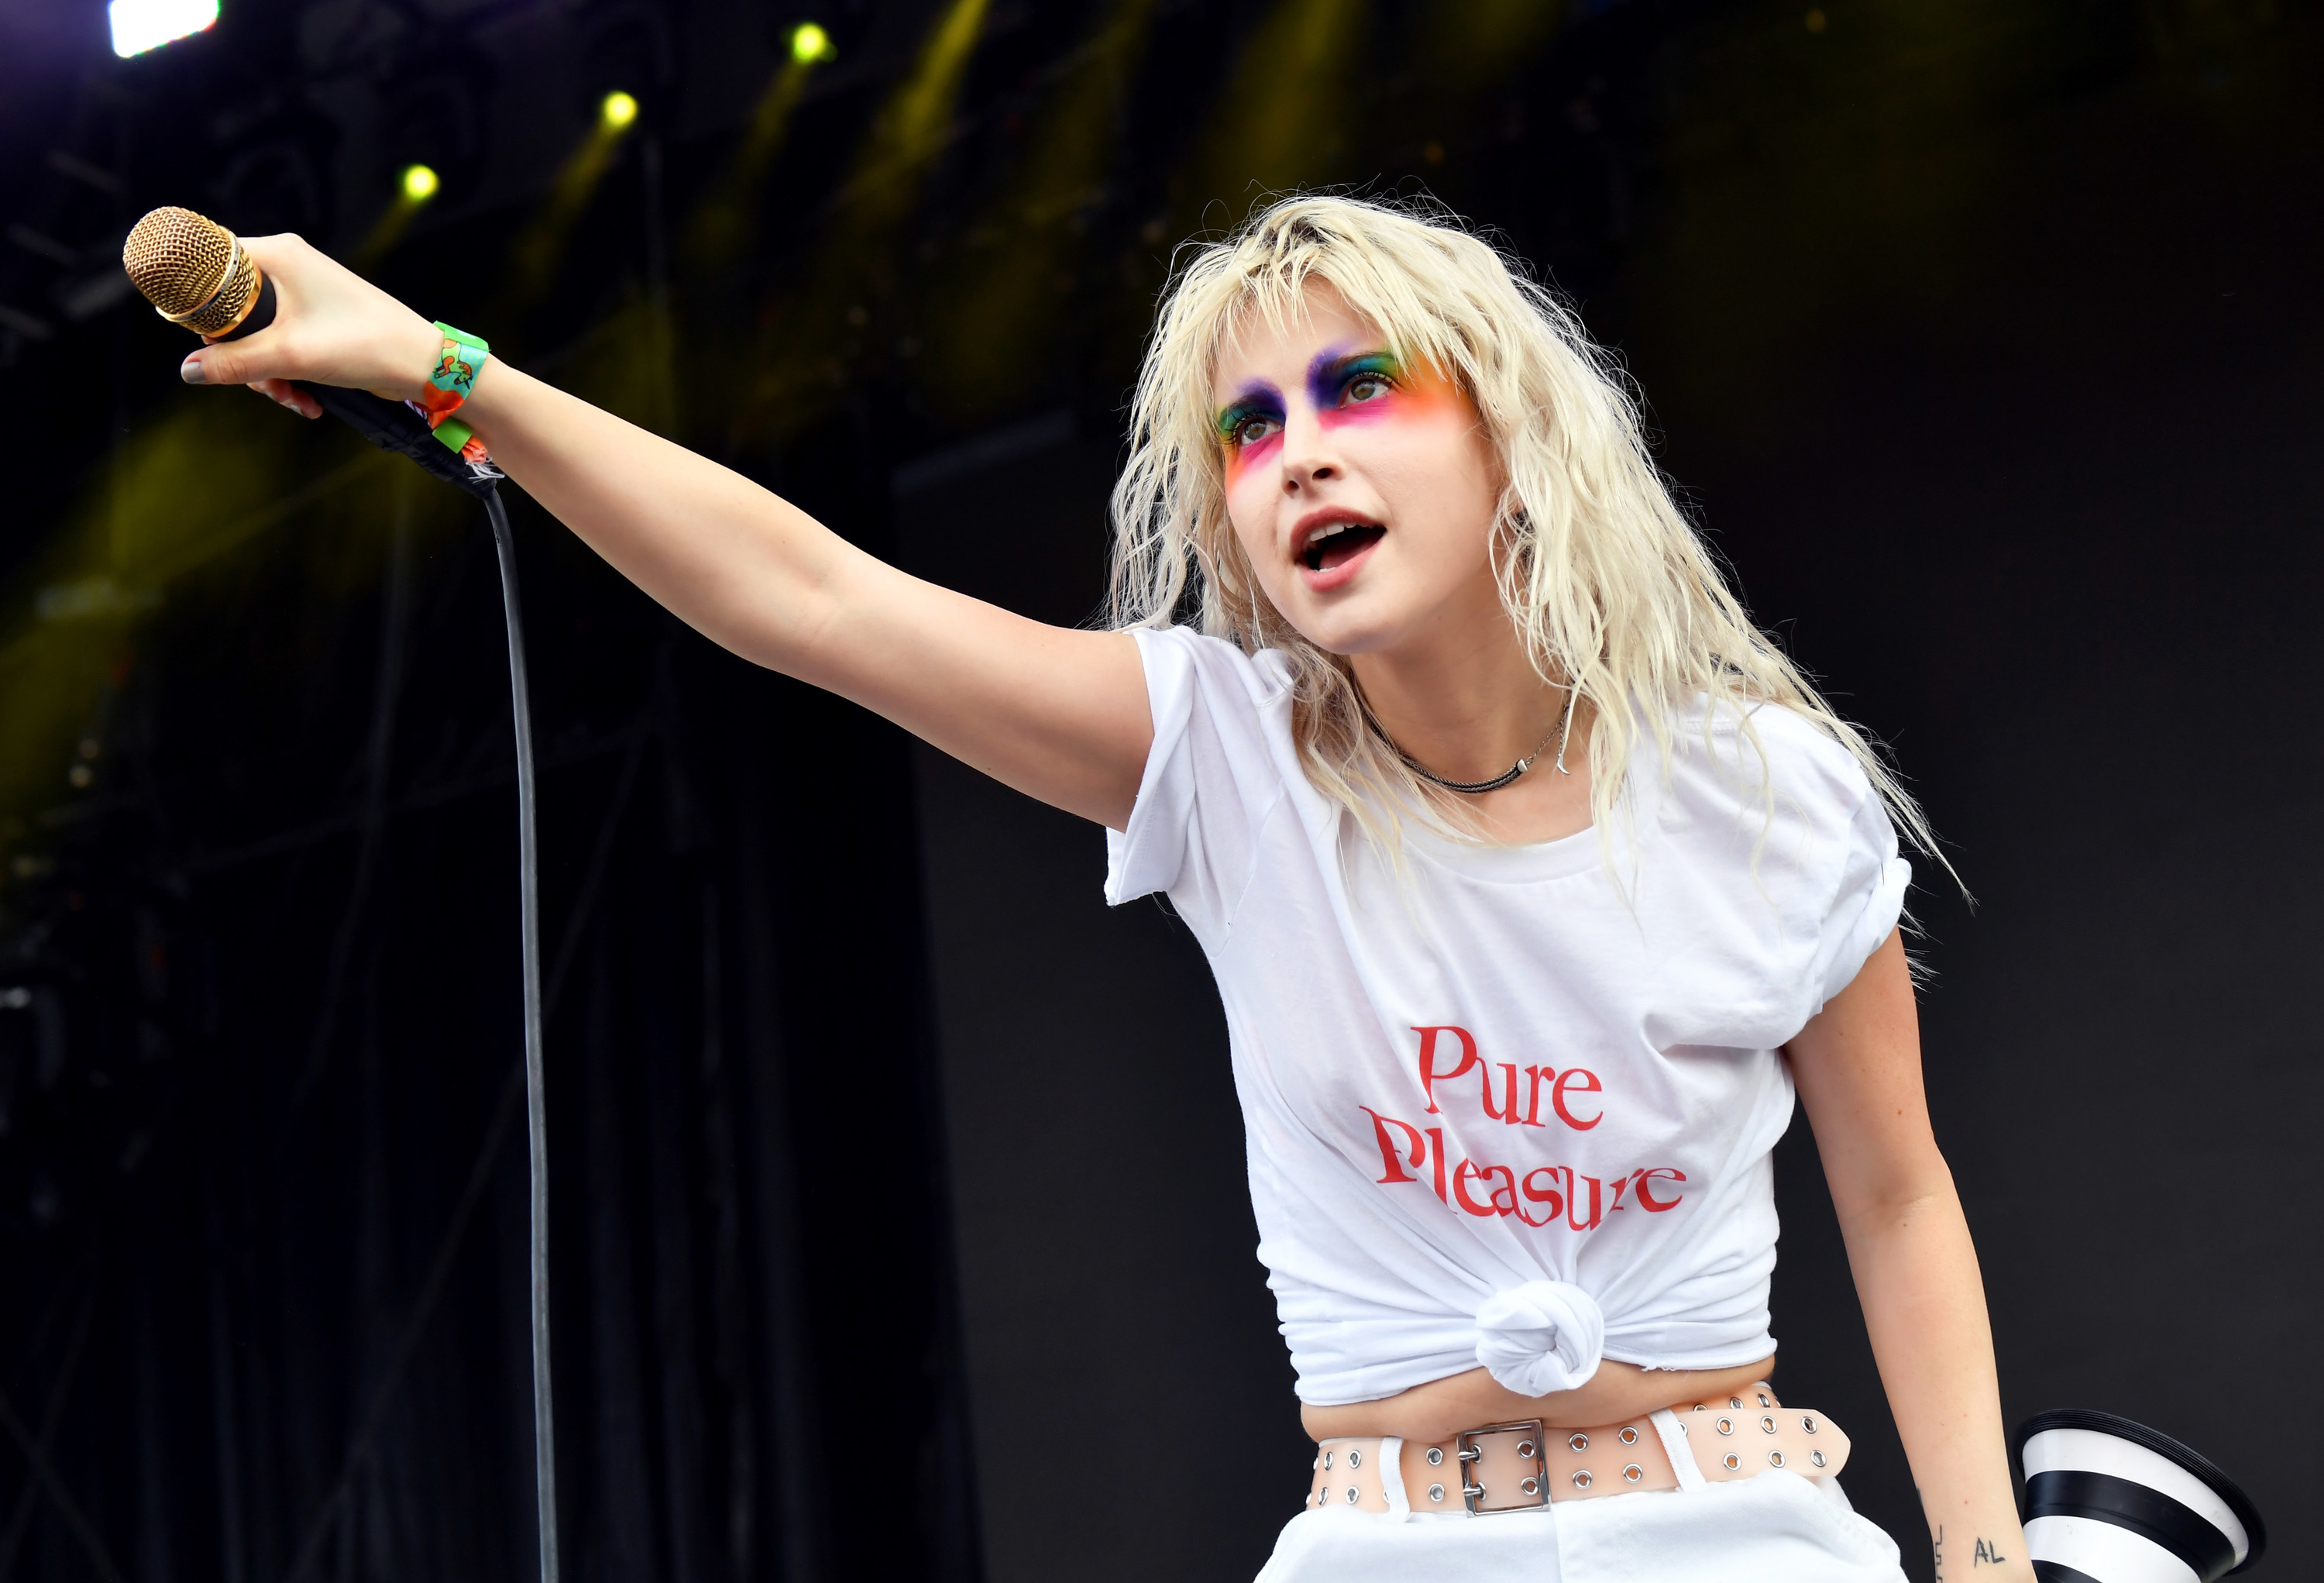 Paramore lead singer Hayley Williams performing with a &quot;Pure Pleasure&quot; T-shirt